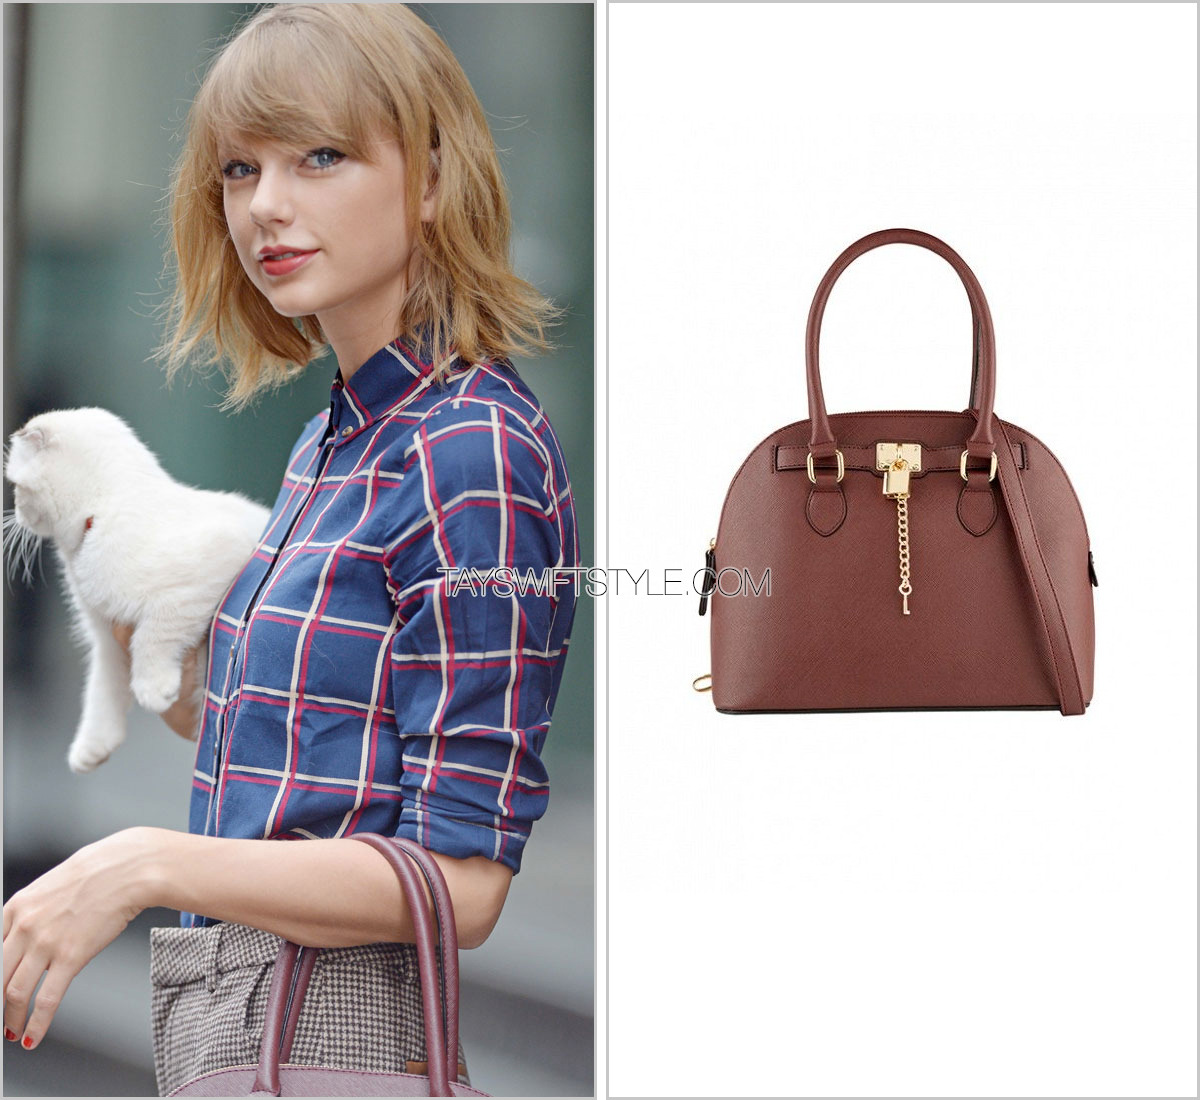 Fall Accessories Trend: Taylor Swift Carries a $50 Aldo Handbag in